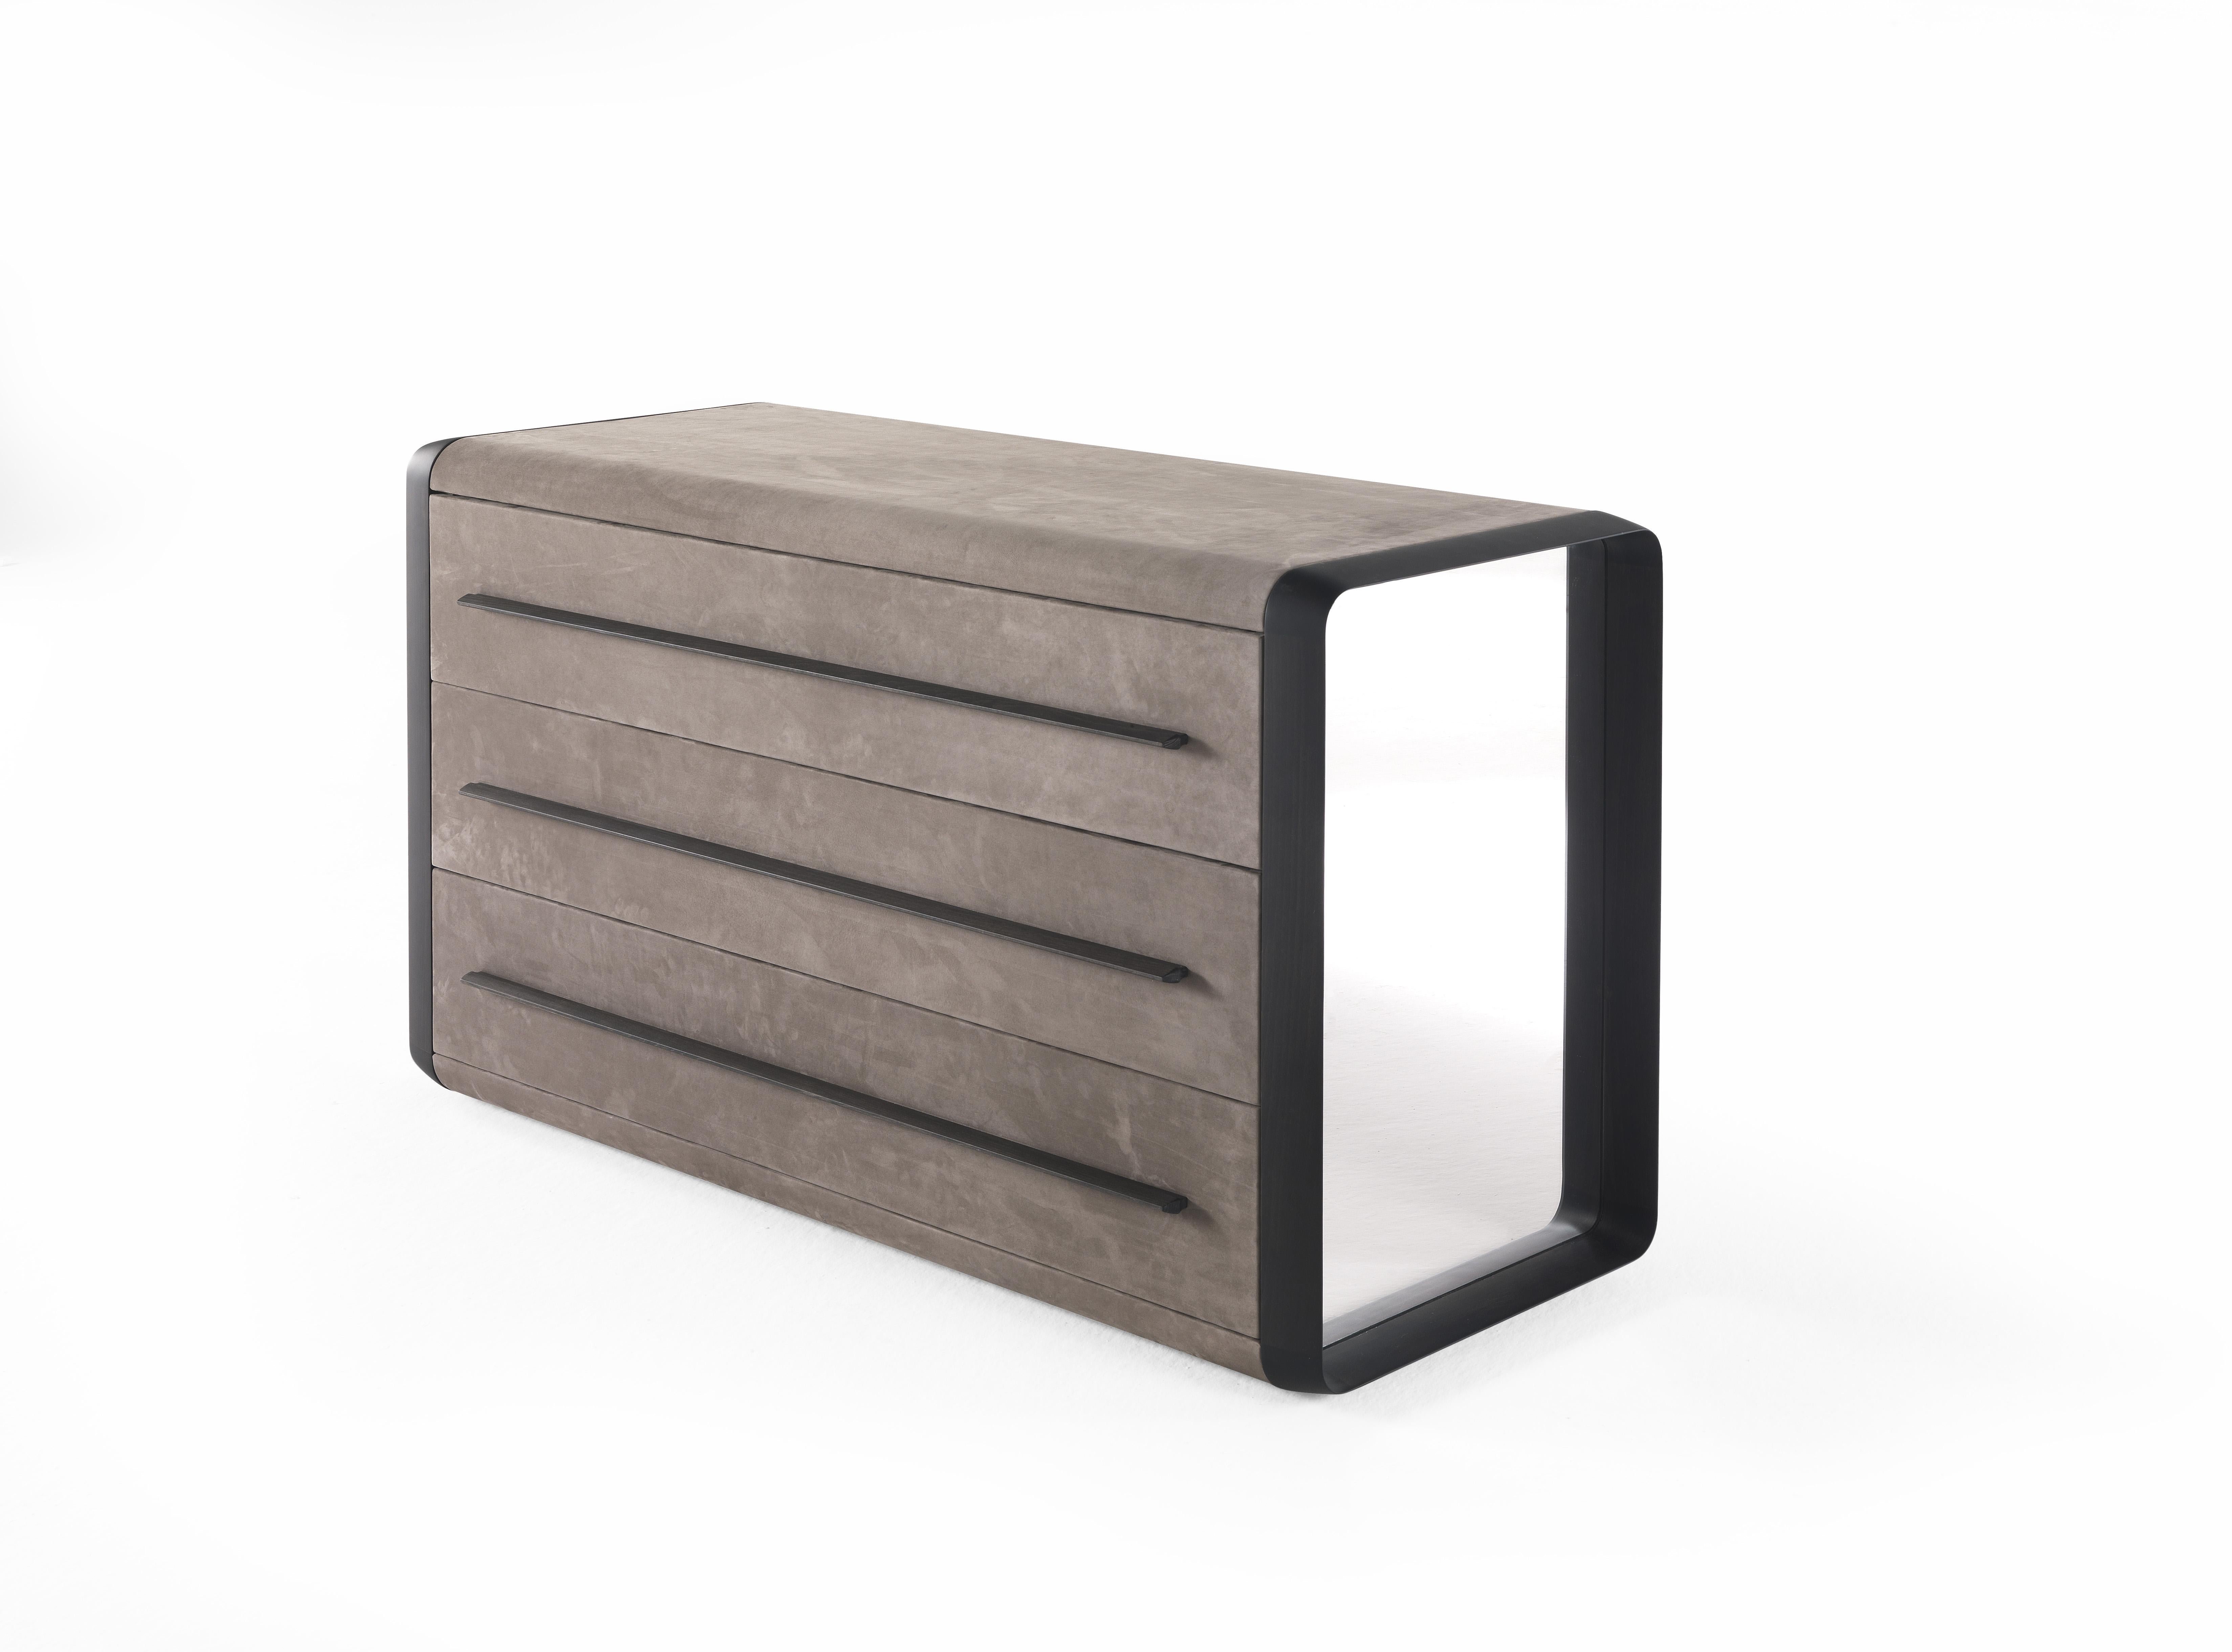 Combining functionality and style, Wynwood chest of drawers completes the bedroom with its linear silhouette. The brown and grey shades lend the piece a sophisticated elegance with a metropolitan accent.
Wynwood Drawer unit with external structure